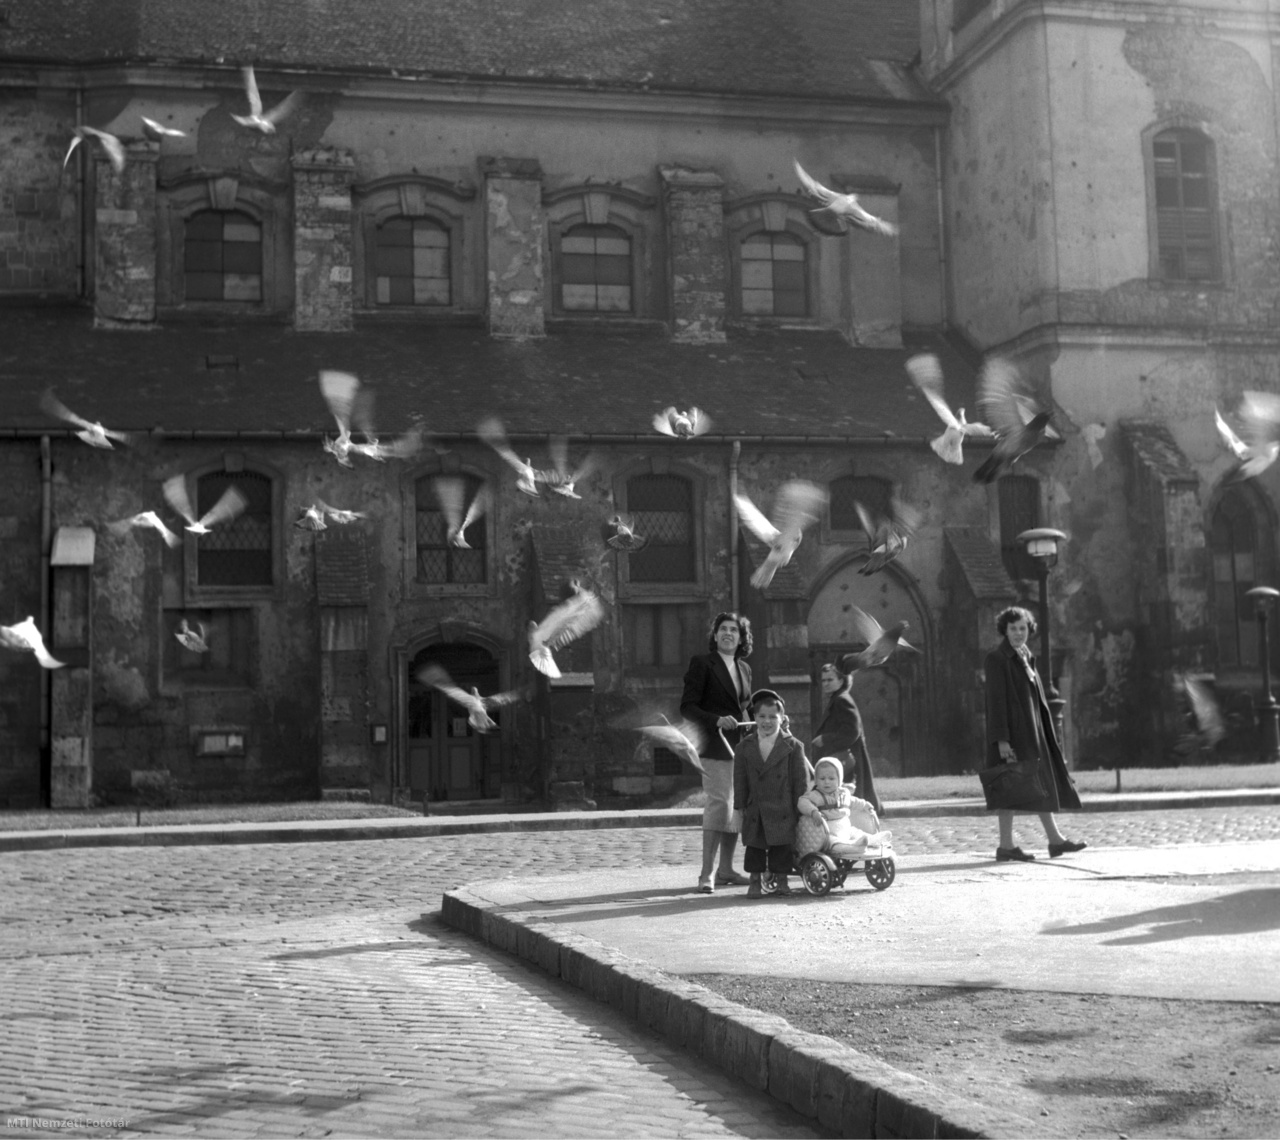 Budapest, October 8, 1957 Passers-by watch pigeons fly in the background of Downtown Church on March 15 Square